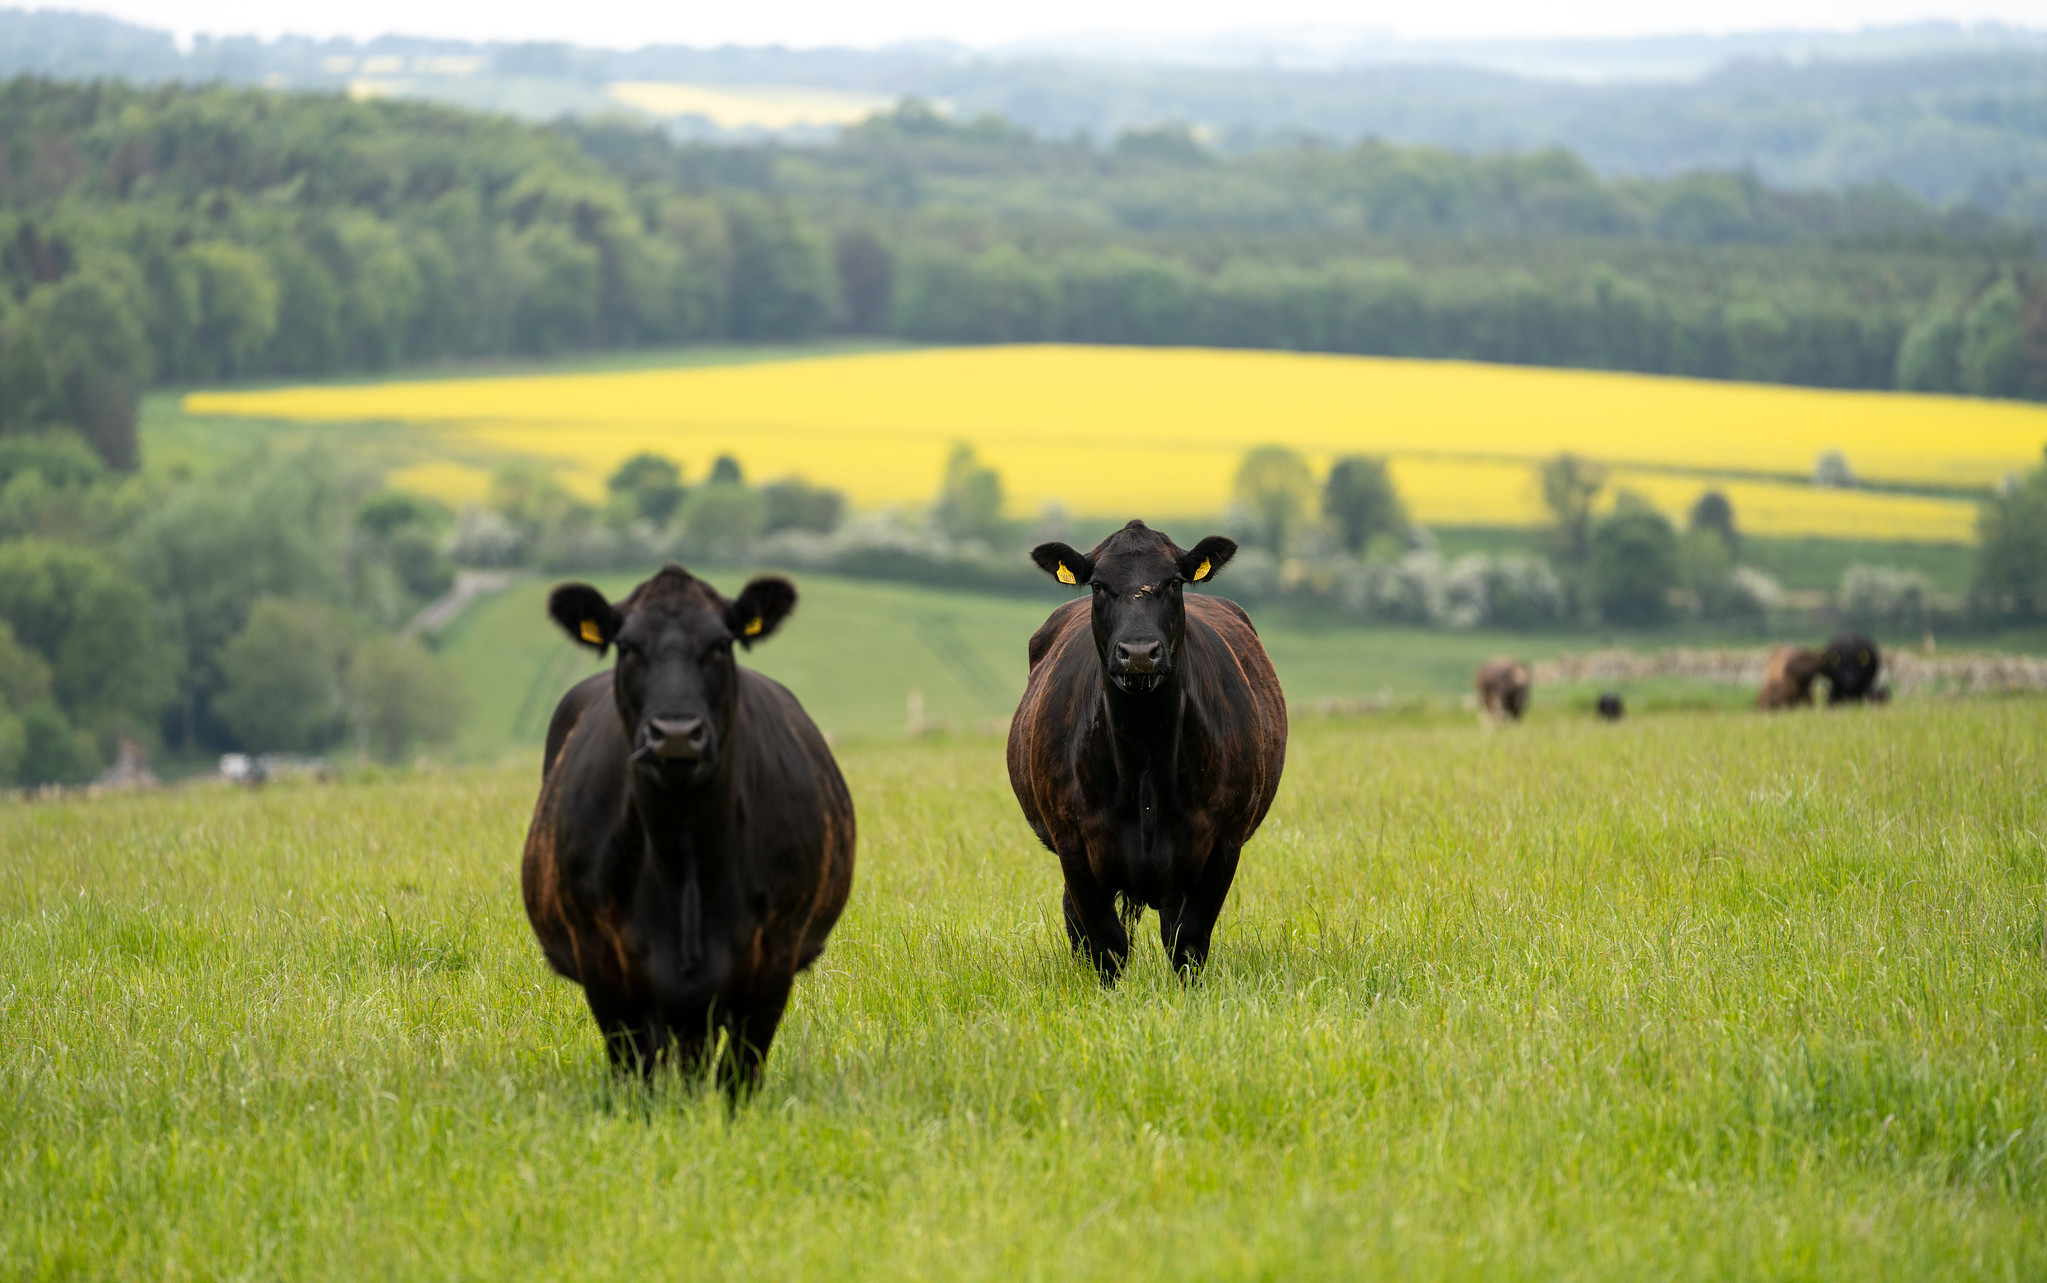 Two cows in a field looking towards camera